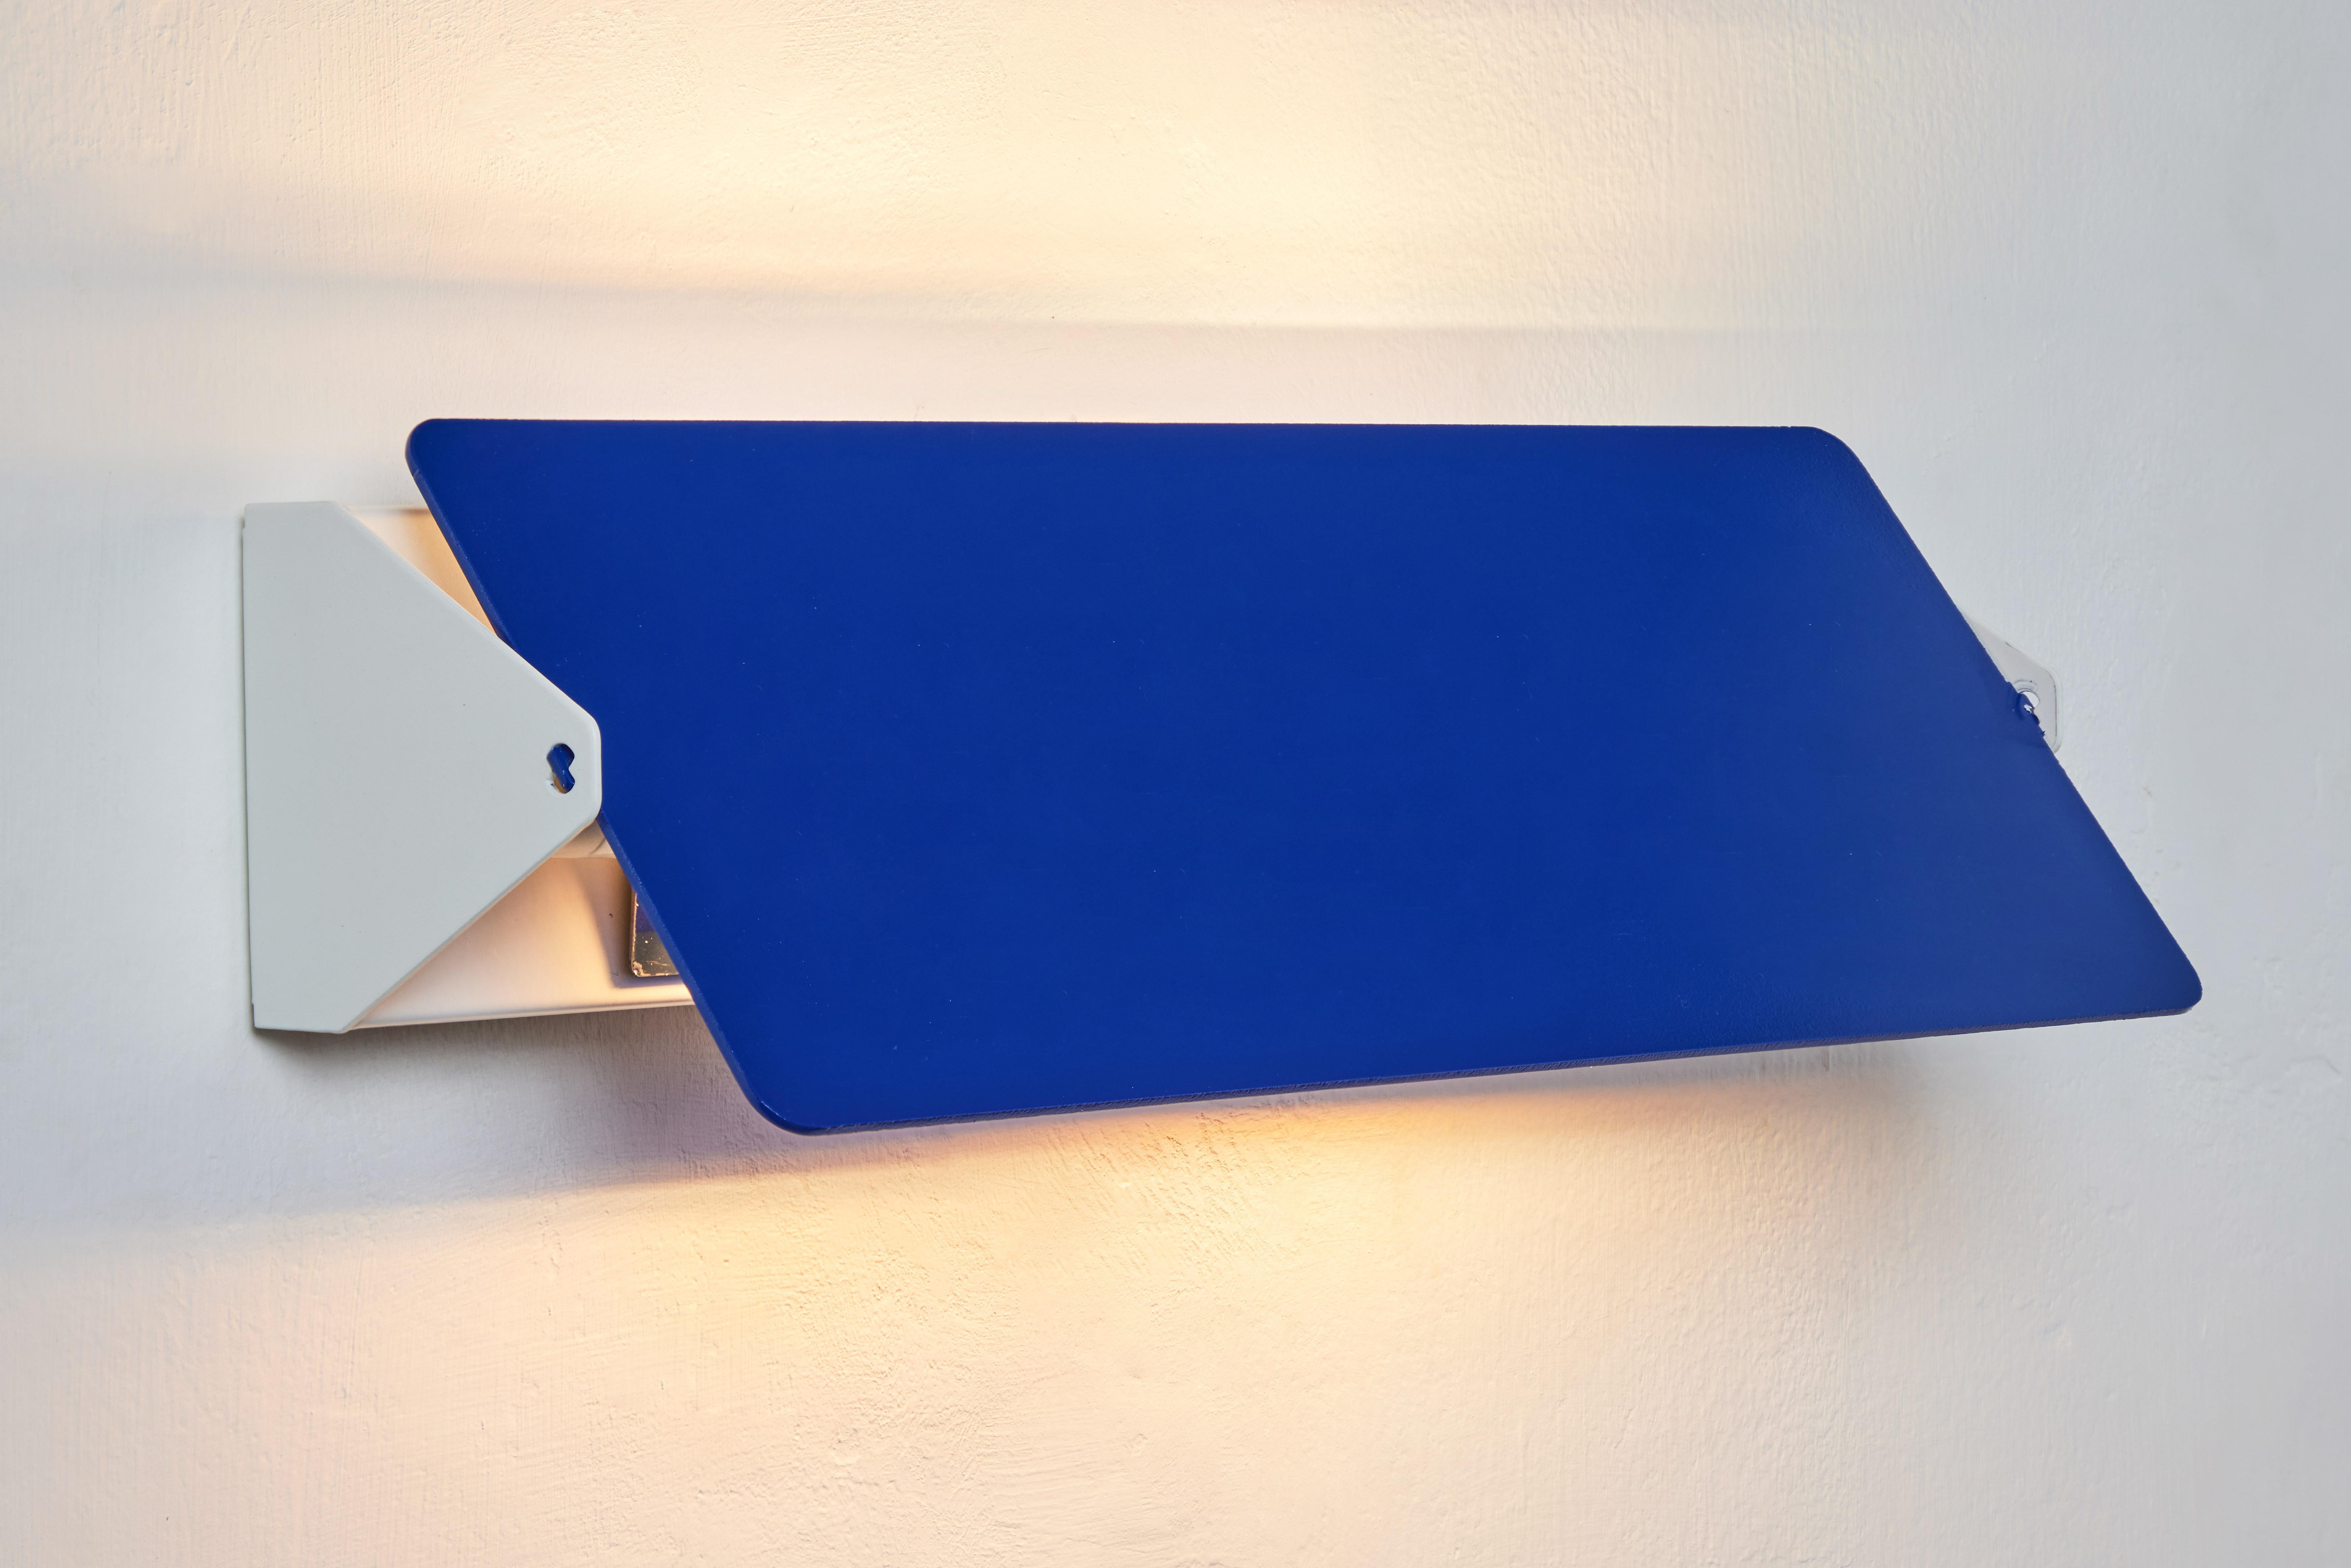 Large Charlotte Perriand 'Applique À Volet Pivotant Double' wall light in blue. 

Originally designed in the 1950s as the iconic CP1, these newly produced authorized re-editions are still made in France with the highest level of integrity and